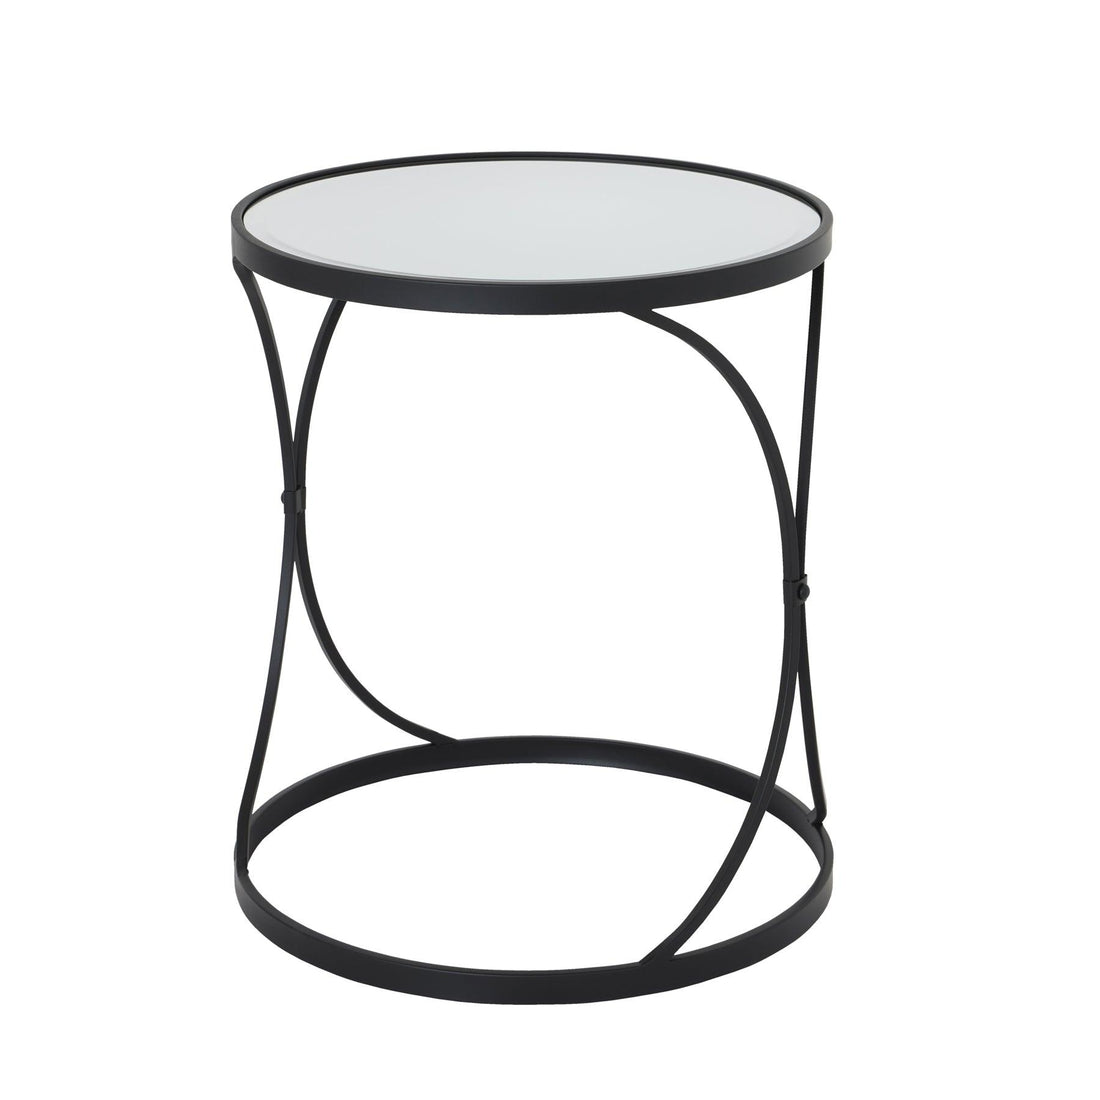 Concaved Set Of Two Black Mirrored Side Tables - £289.95 - Furniture > Tables > Side Tables 